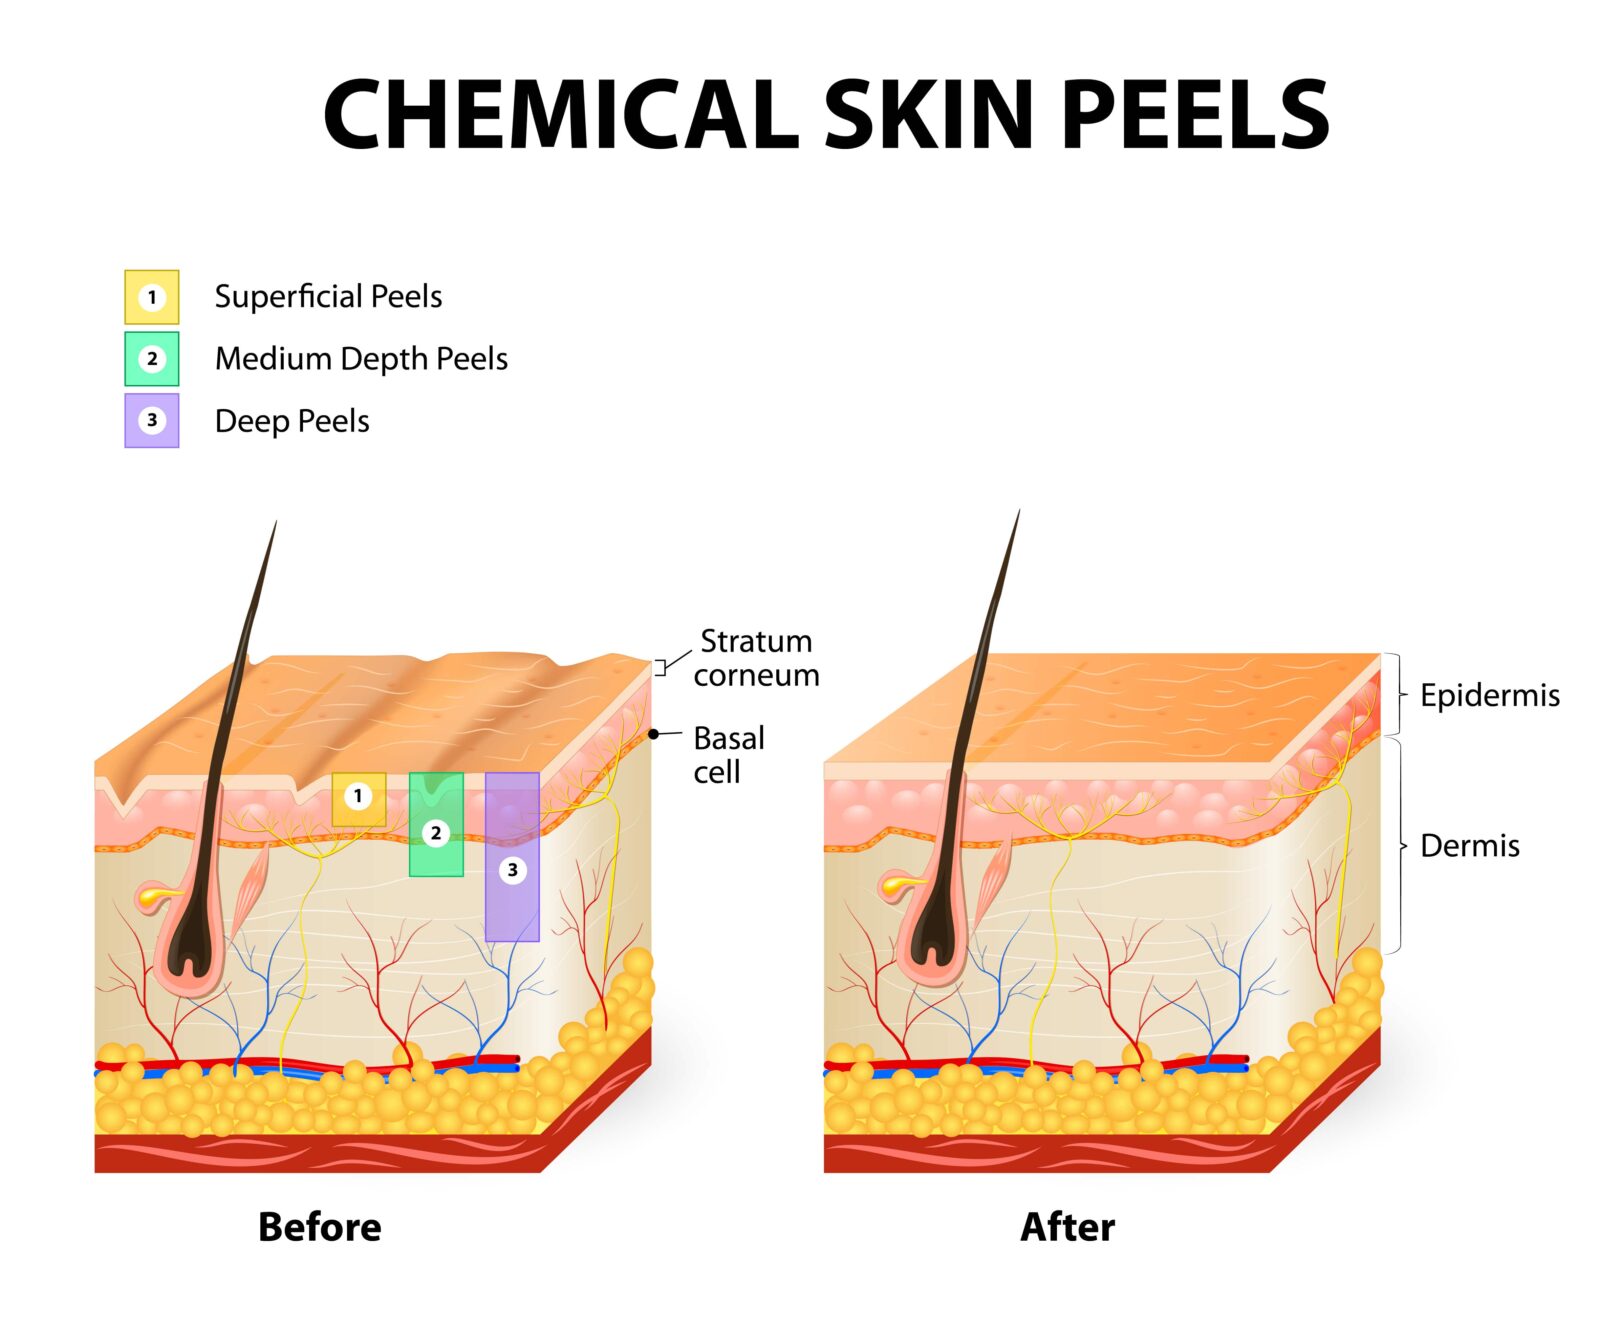 different types of chemical peels and how the affect the skin layers
